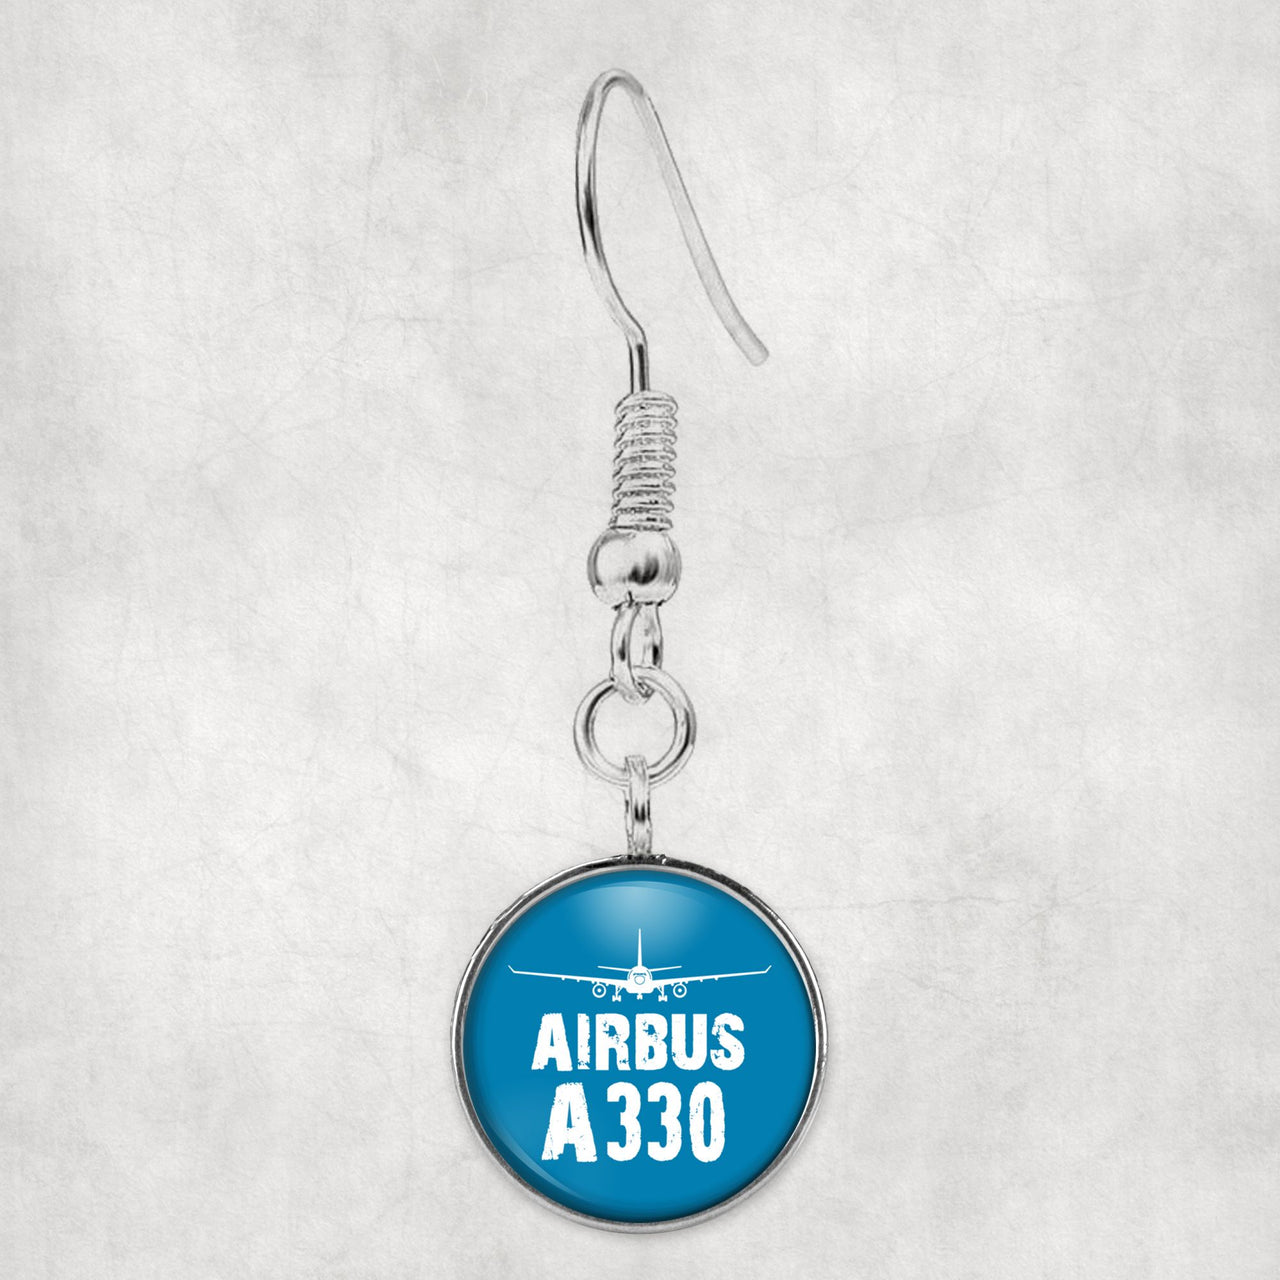 Airbus A330 & Plane Designed Earrings